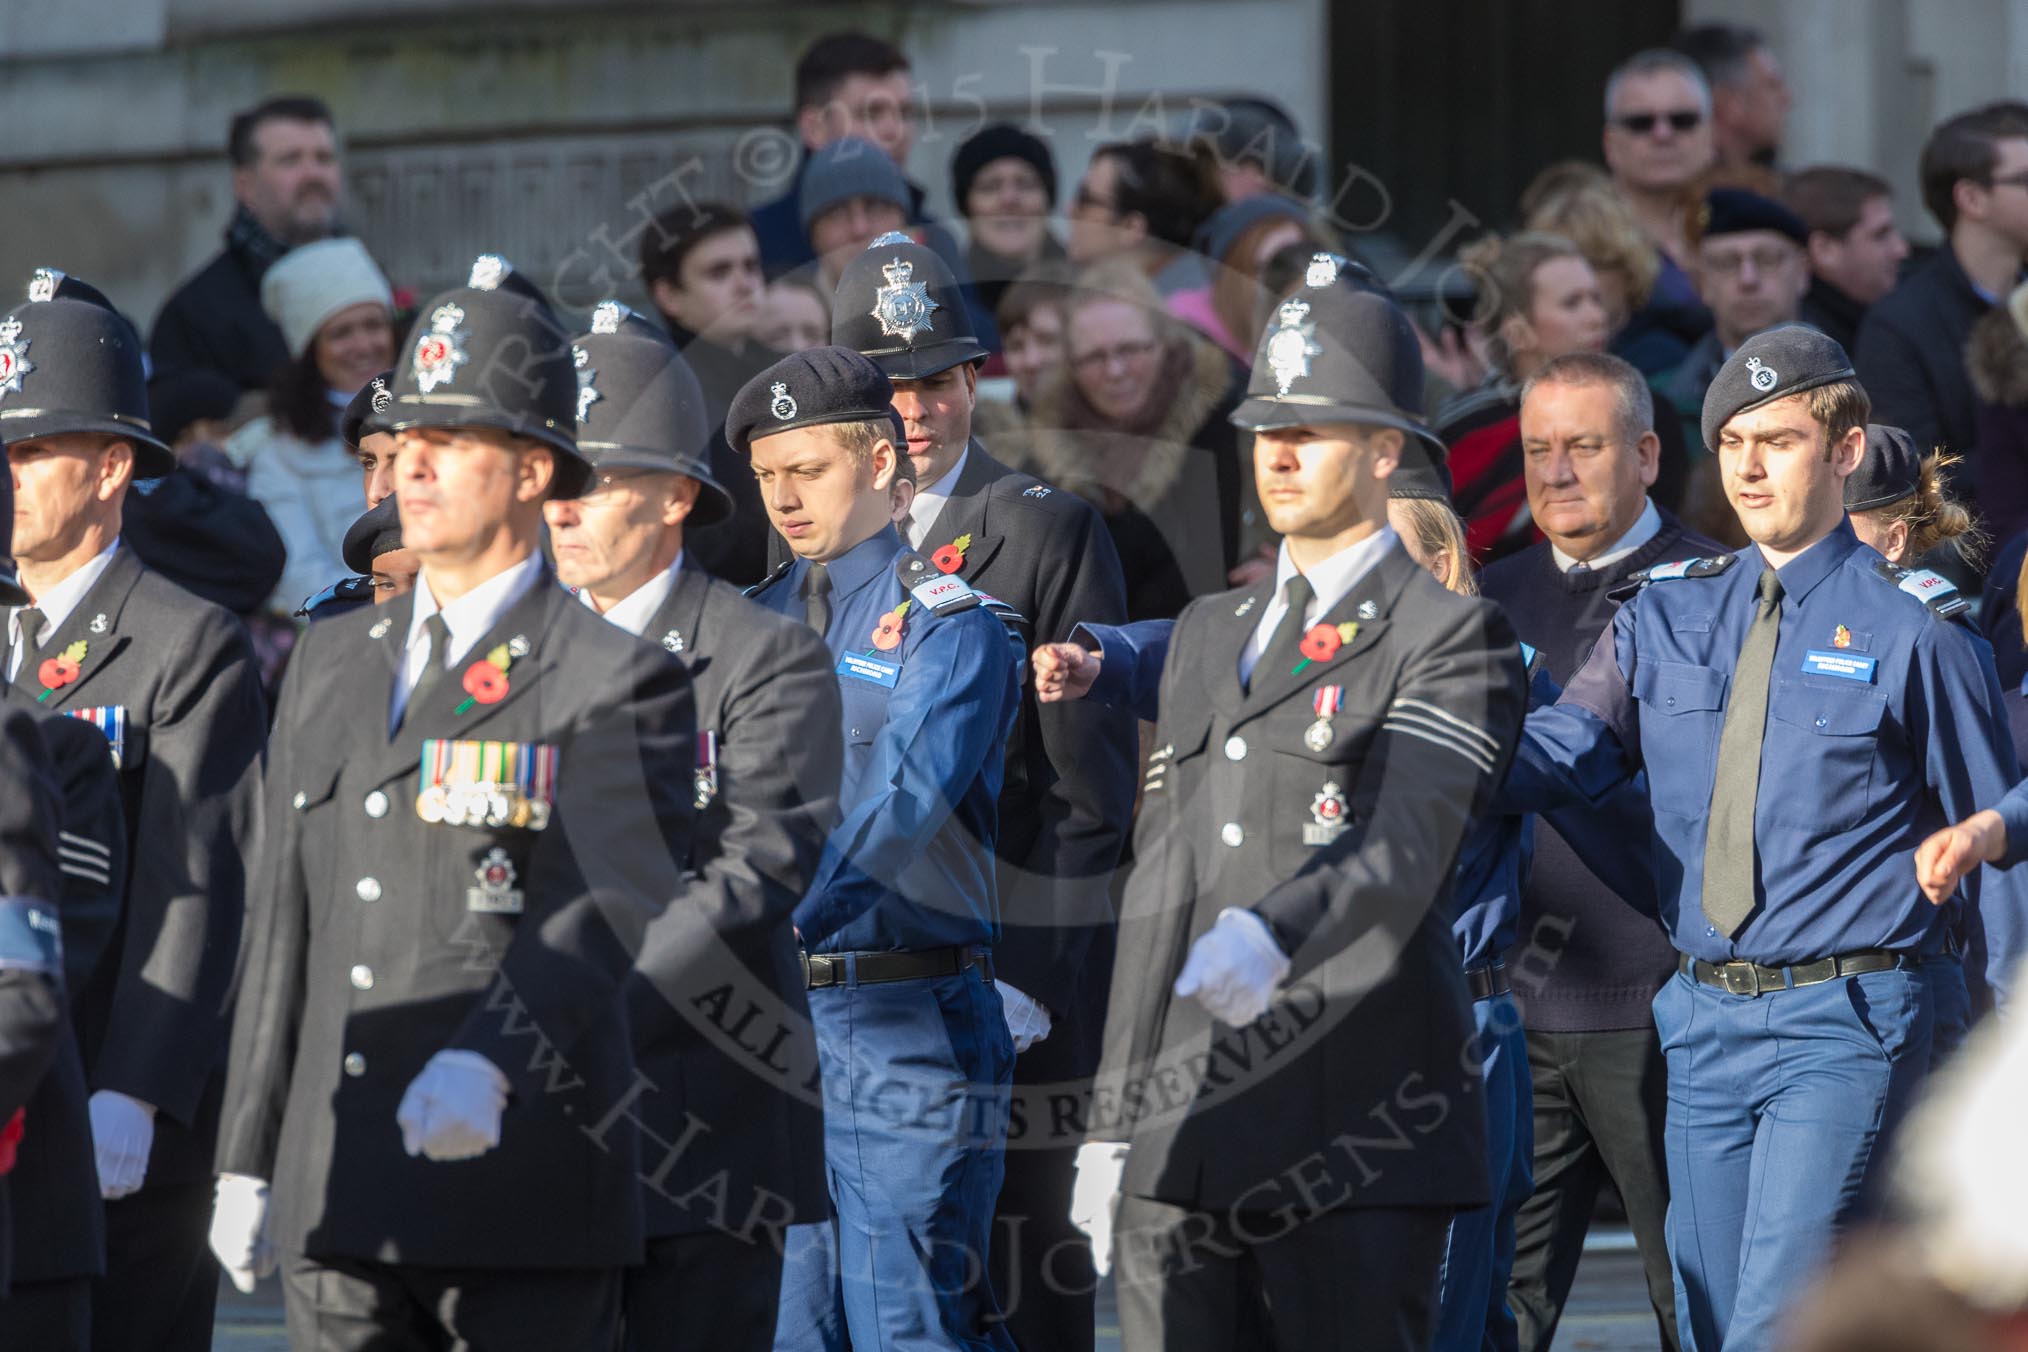 March Past, Remembrance Sunday at the Cenotaph 2016: M39 Kent Police.
Cenotaph, Whitehall, London SW1,
London,
Greater London,
United Kingdom,
on 13 November 2016 at 13:19, image #2938